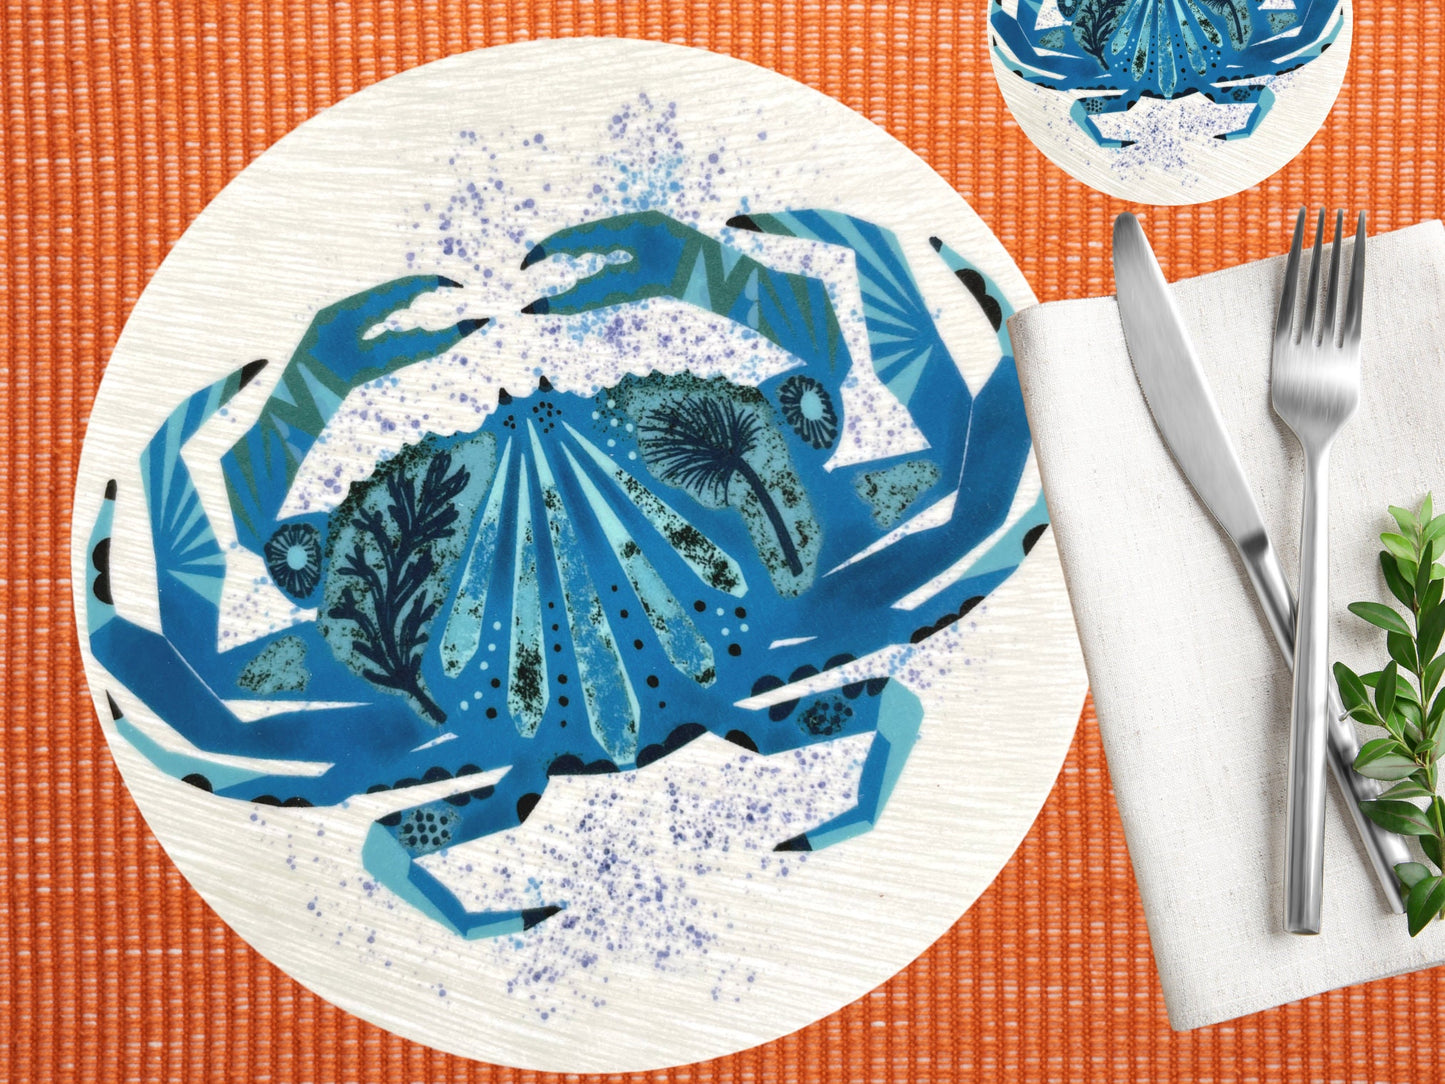 Coastal Table Mats, Beach Style Table Mats, Fish Place Settings, Round Seaside table mats, Cork backed melamine lobster/crab table mats